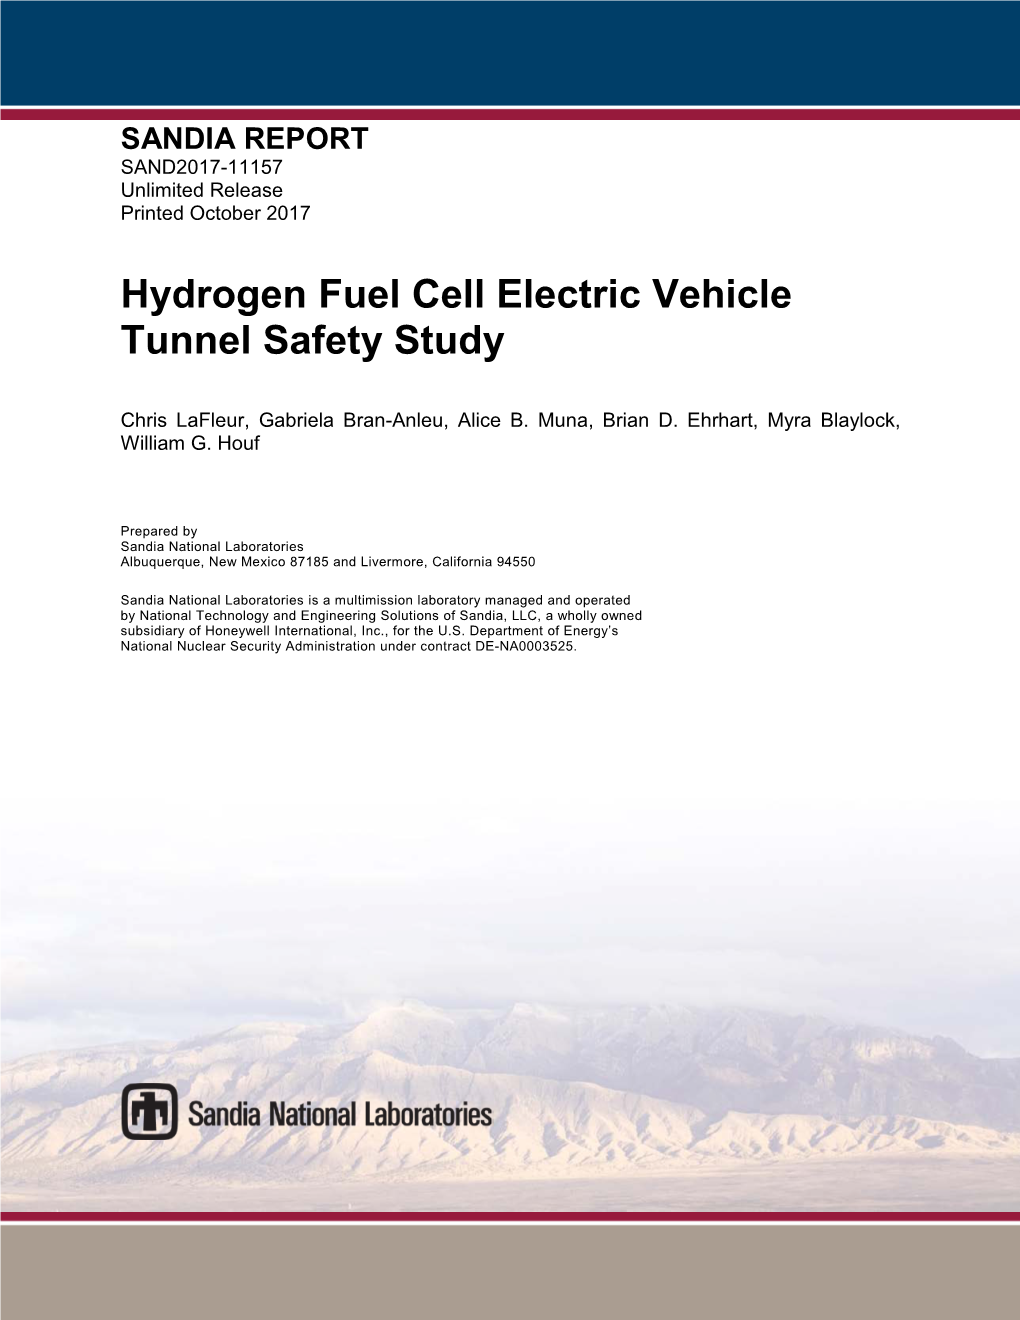 Hydrogen Fuel Cell Electric Vehicle Tunnel Safety Study